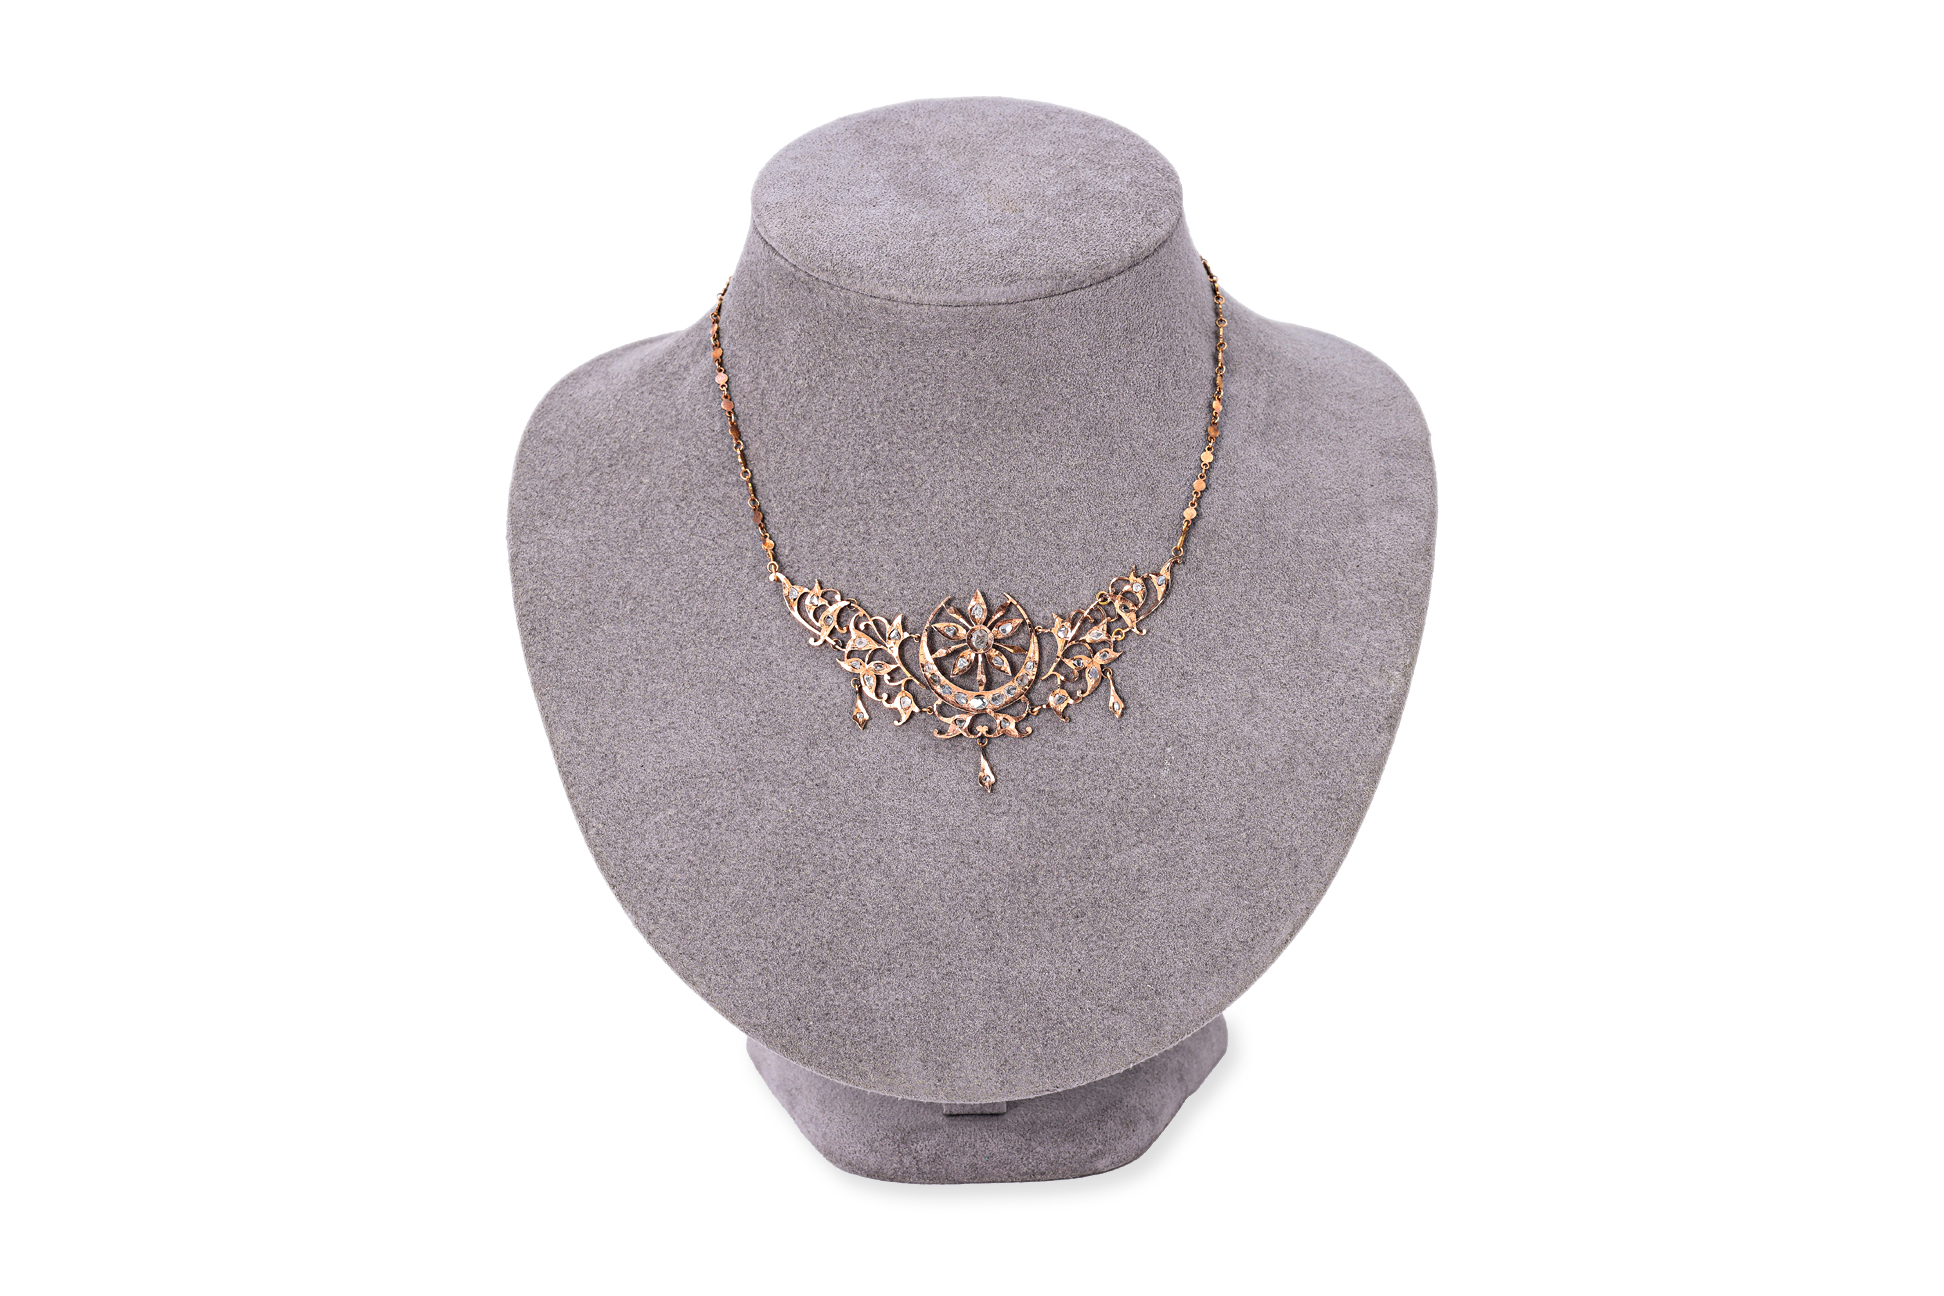 A ROSE GOLD AND INTAN DIAMOND FESTOON NECKLACE - Image 3 of 3